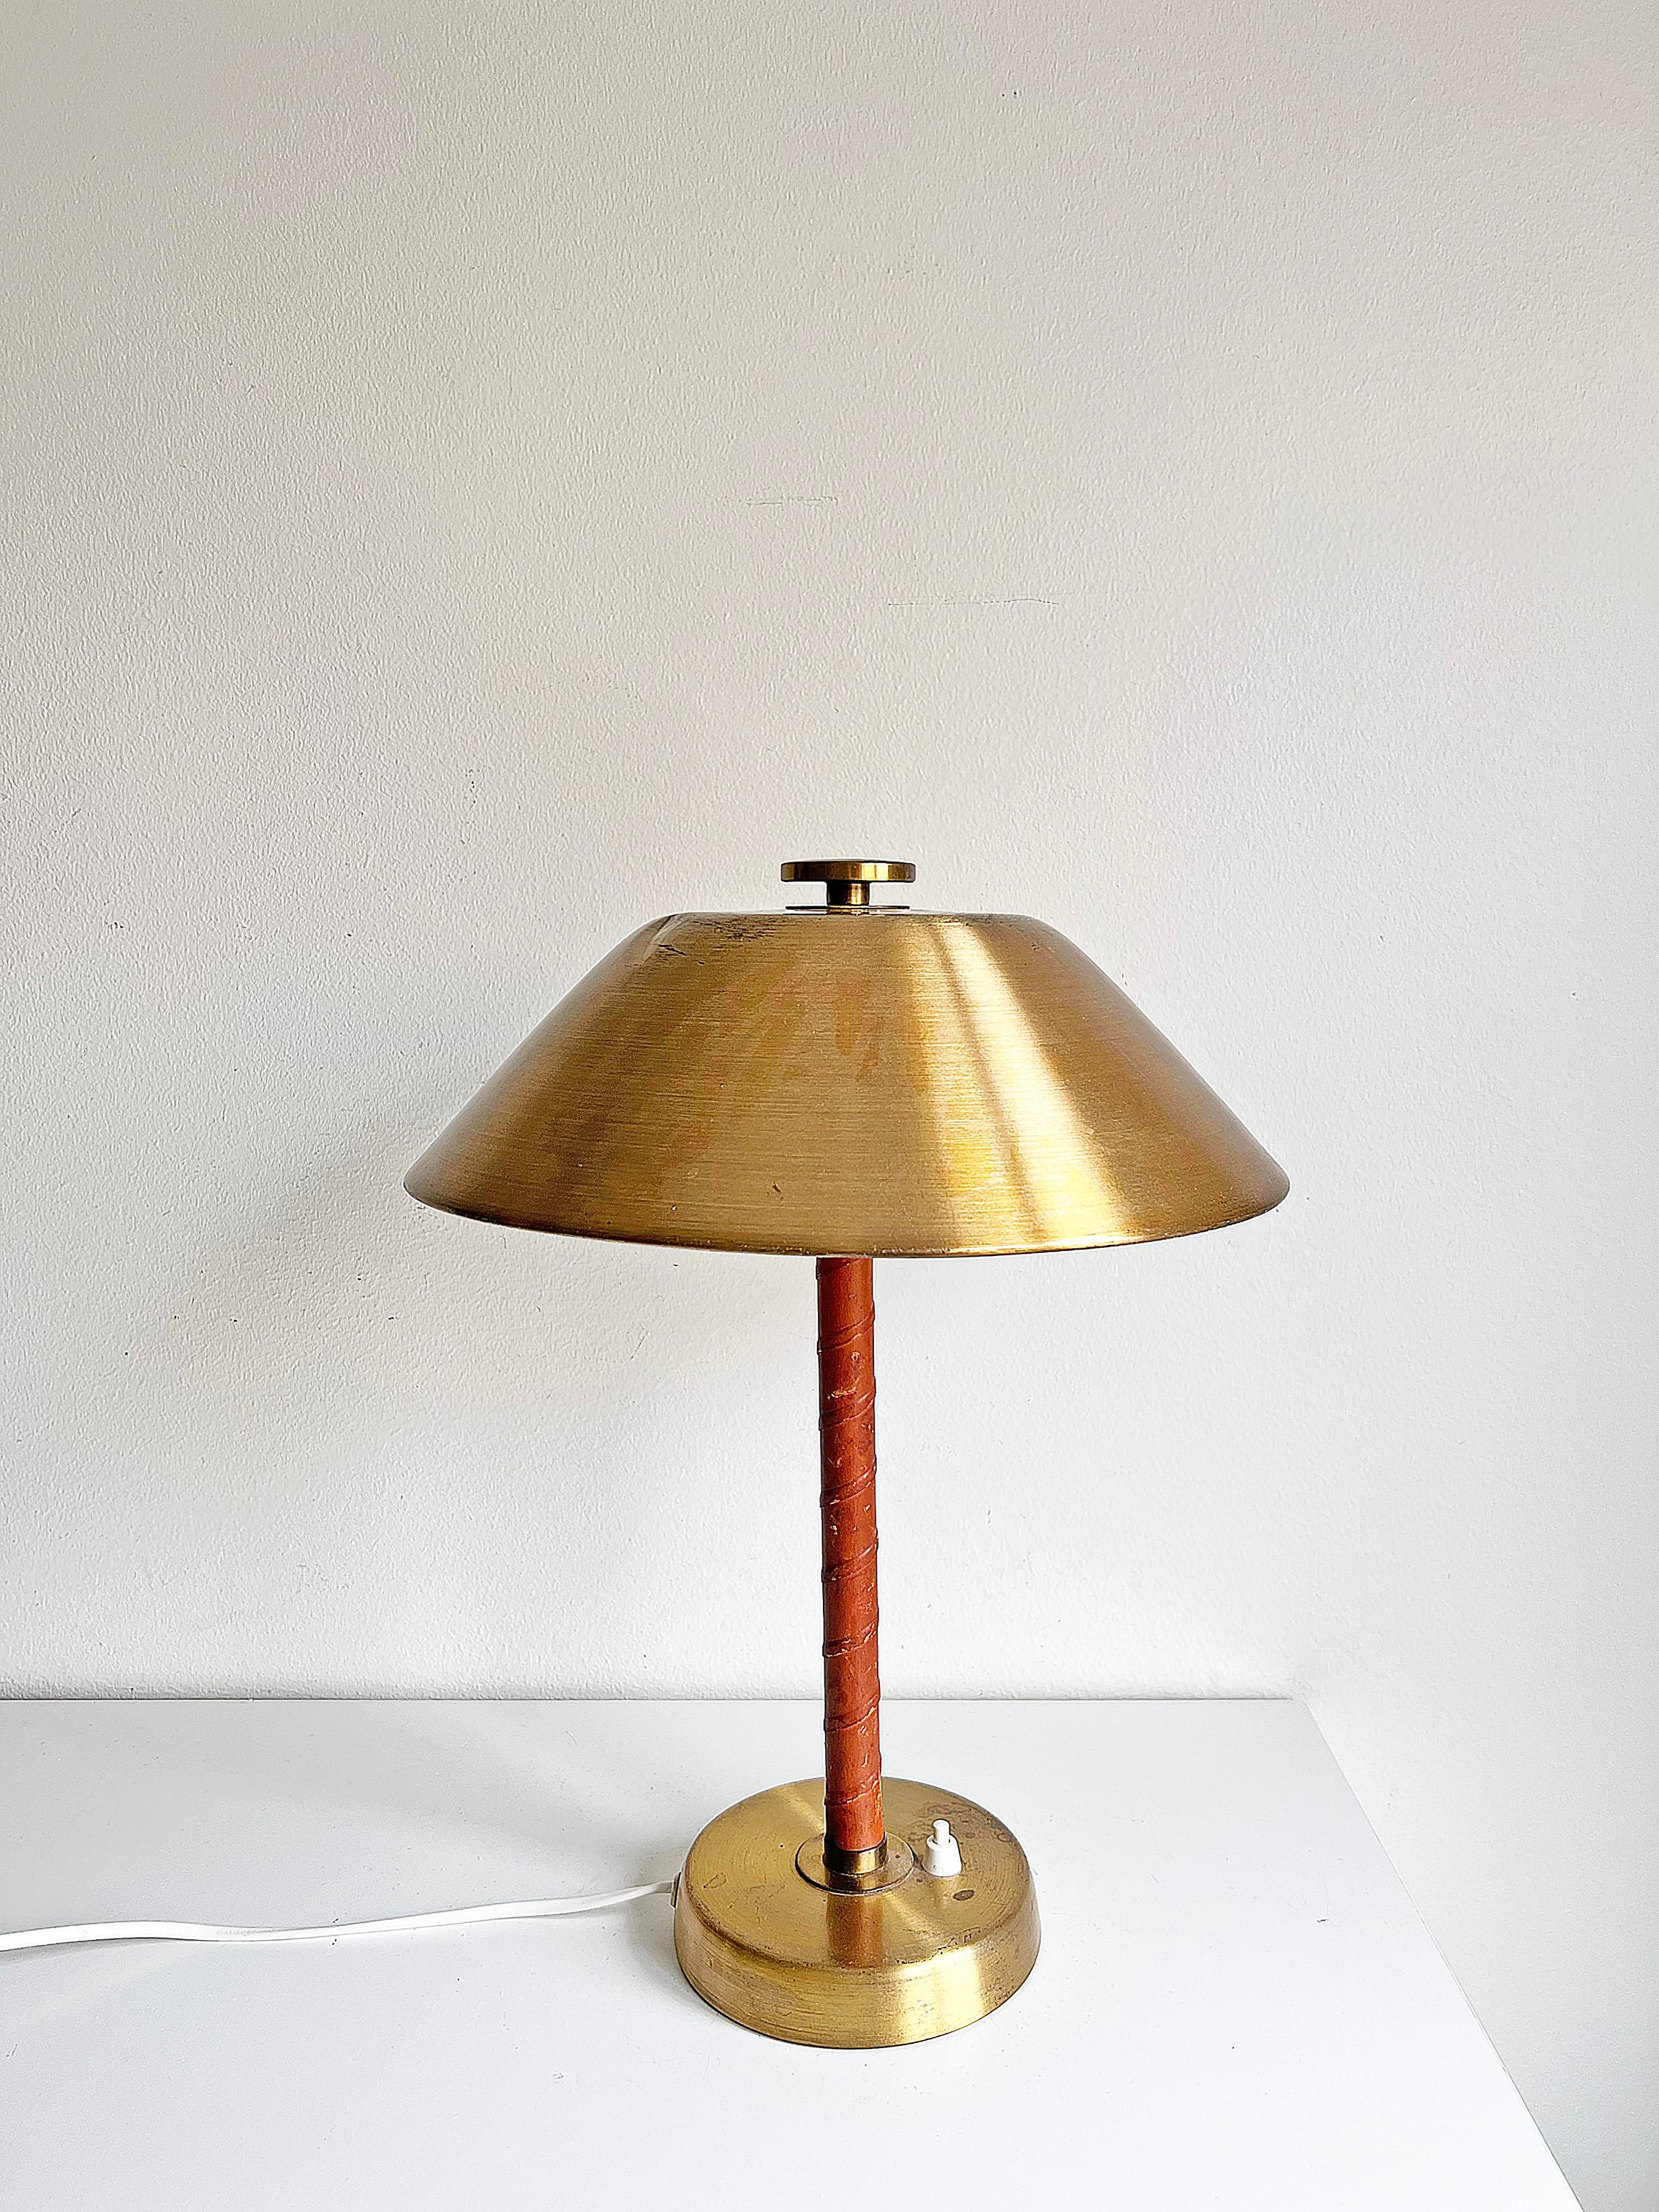 Table lamp model 5014 in brass and cognac leather by Einar Bäckström circa 1940s.
Signed on the bottom. Rewired. We recommend this lamp to be rewired following the buyer's country's electrical standards.

Condition: Please Notice! there is a dent